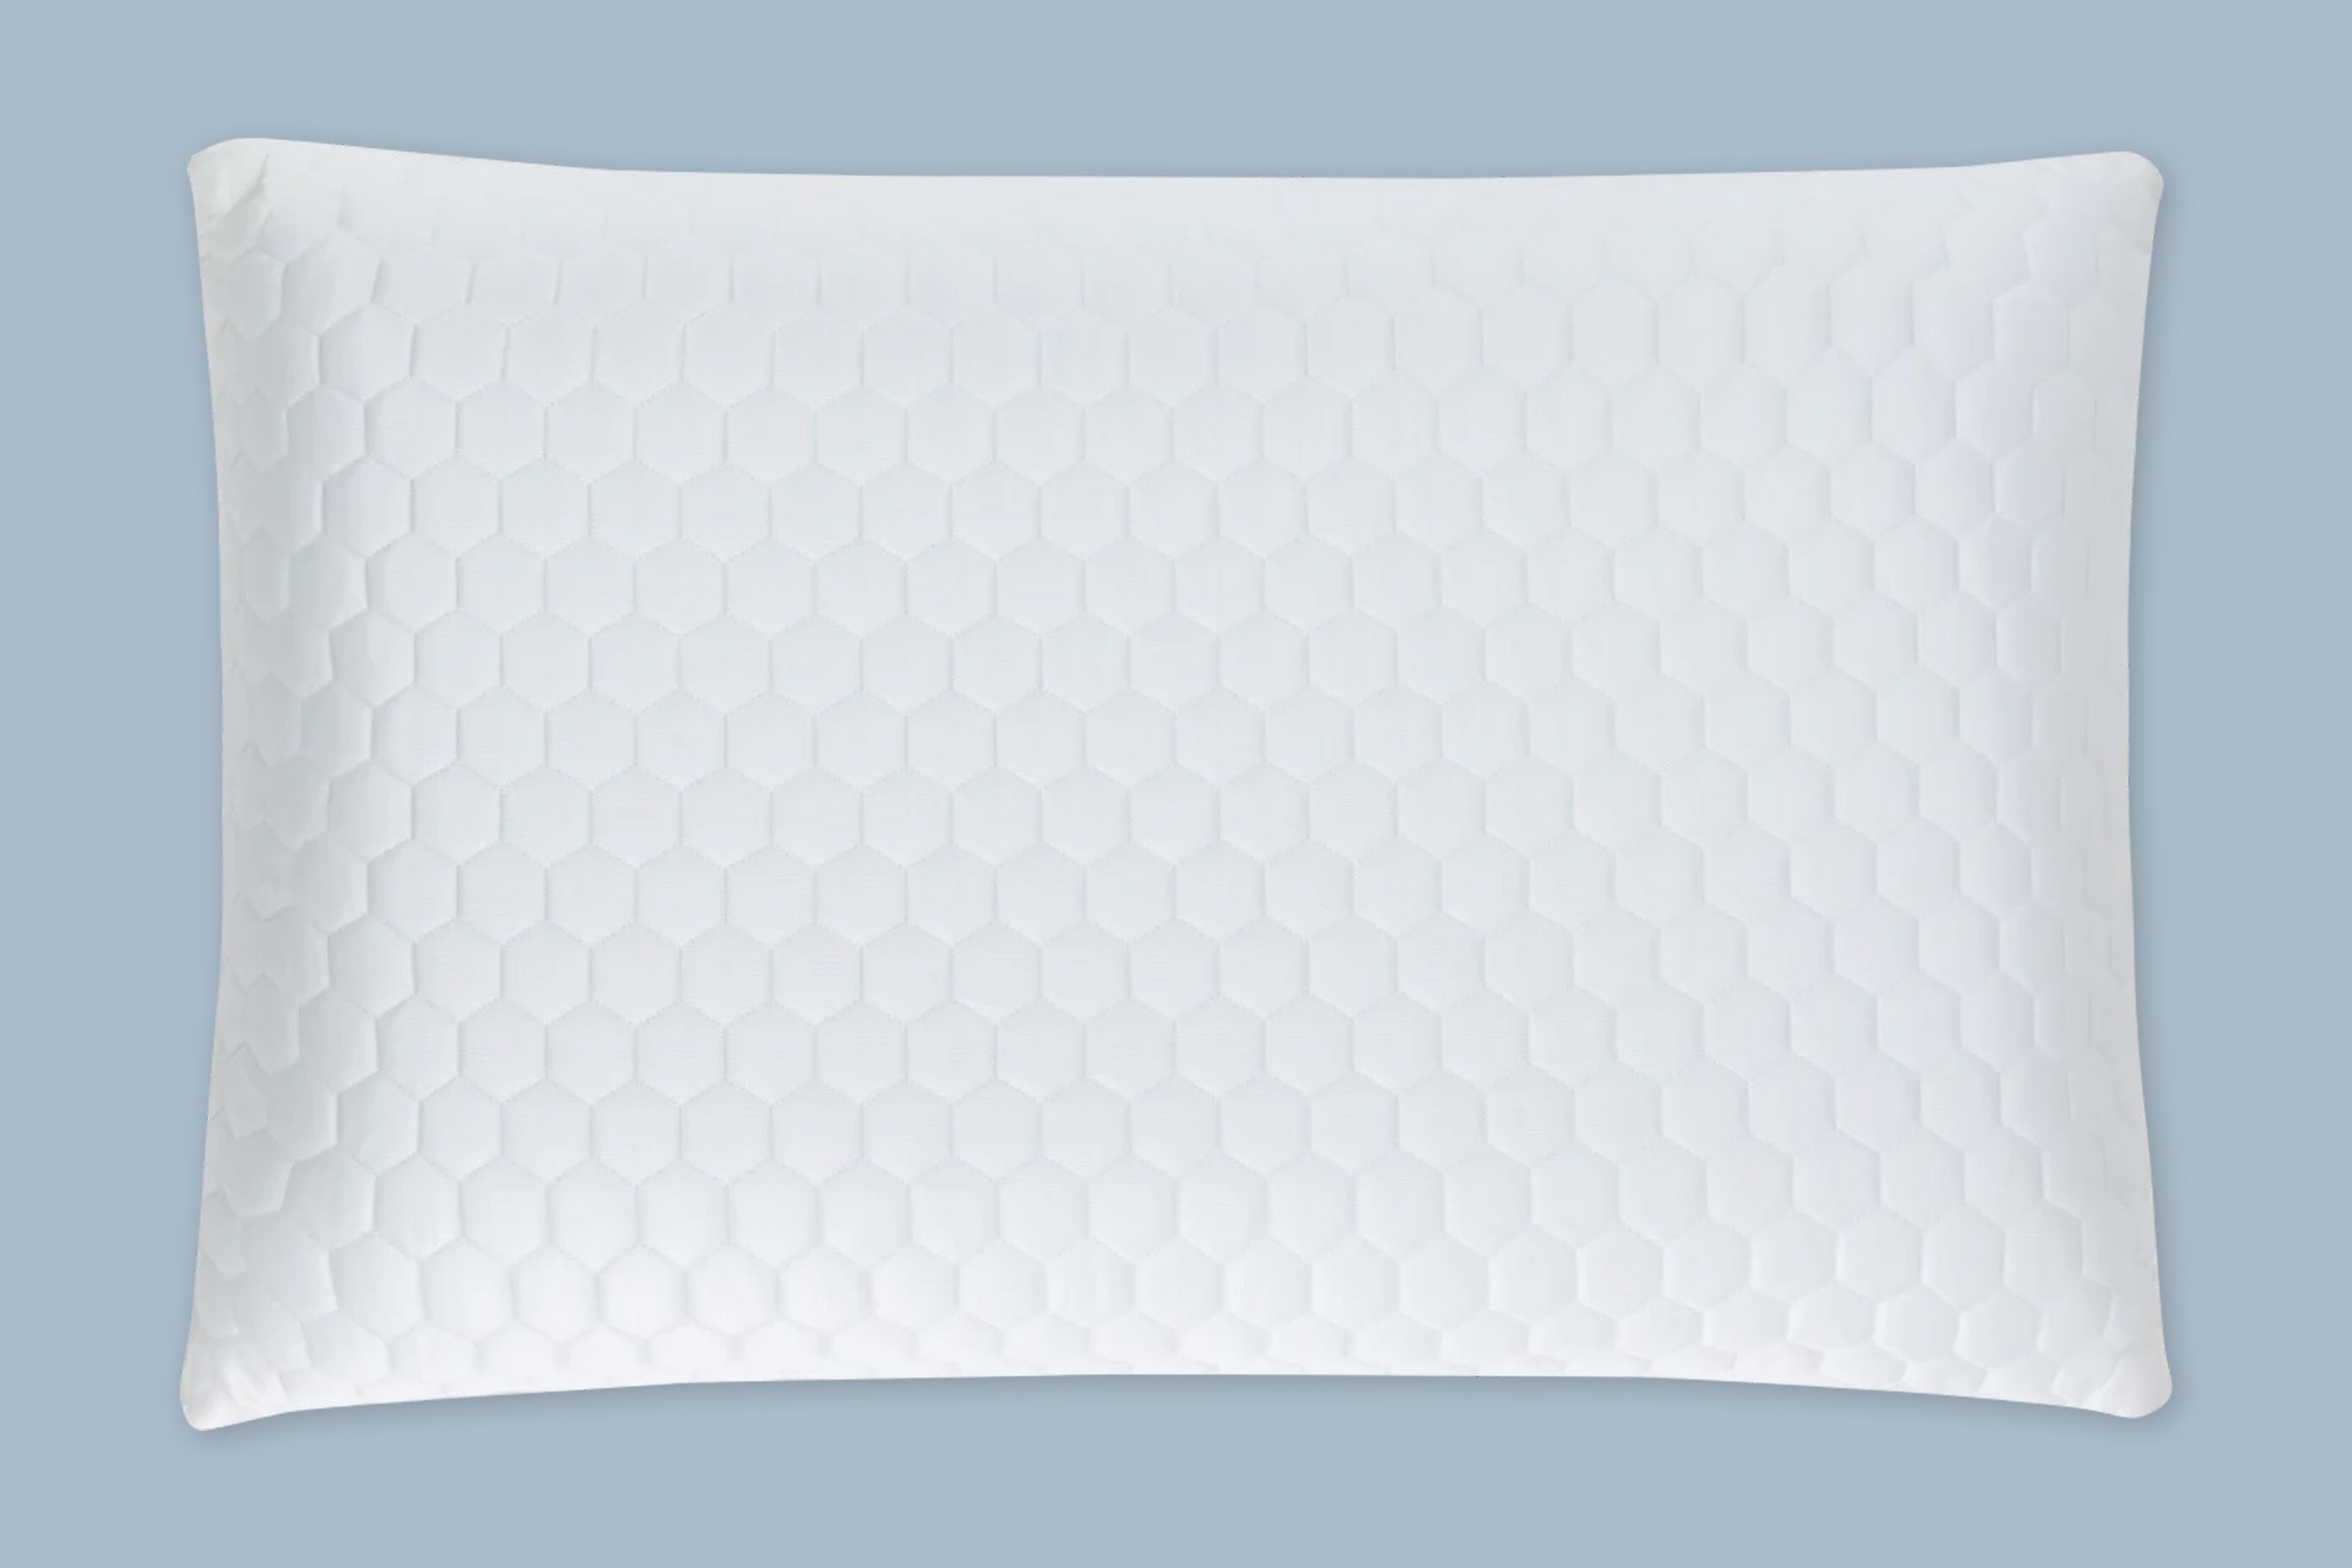 These Hotel-Quality Pillows Have Over 14,000 Perfect Ratings